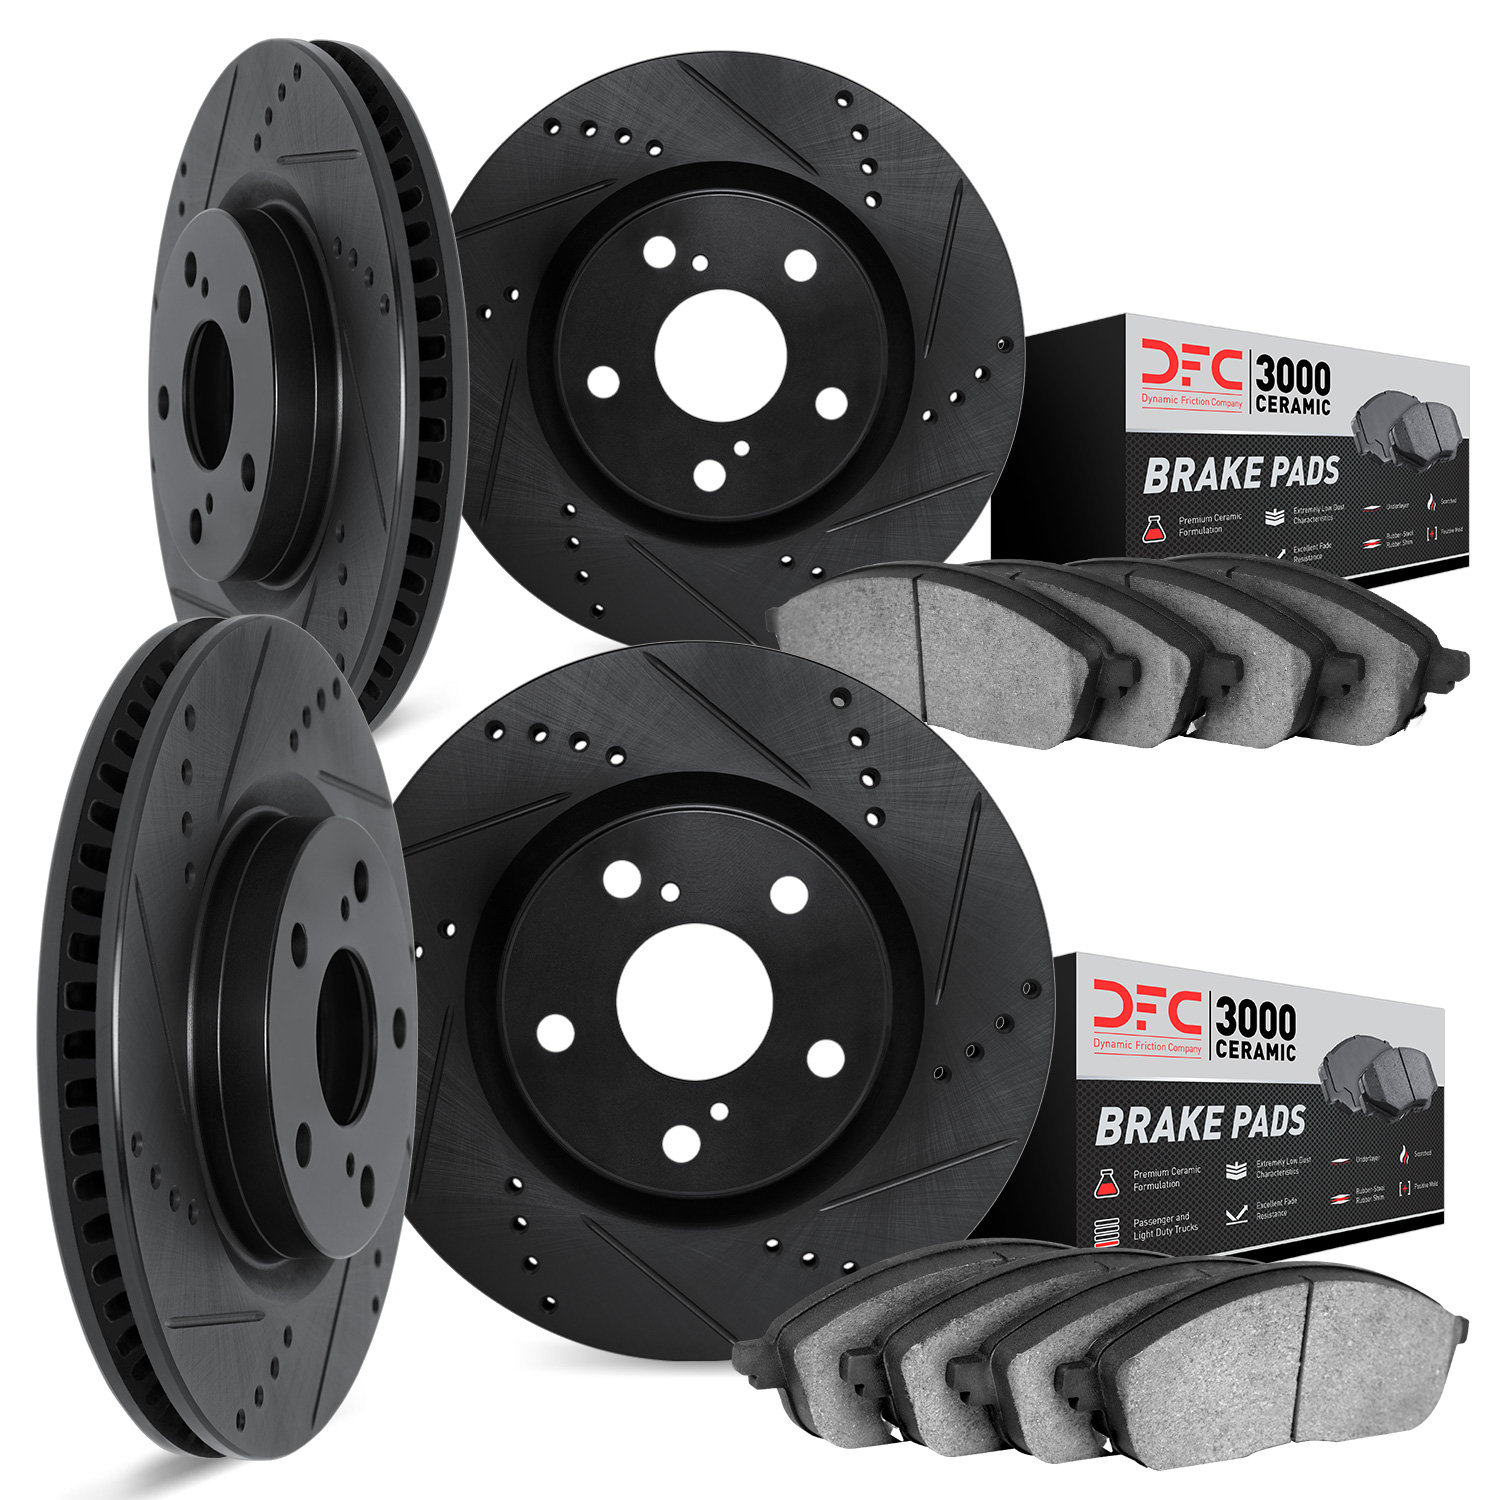 8304-11010 Drilled/Slotted Brake Rotors with 3000-Series Ceramic Brake Pads Kit [Black], 2006-2009 Land Rover, Position: Front a